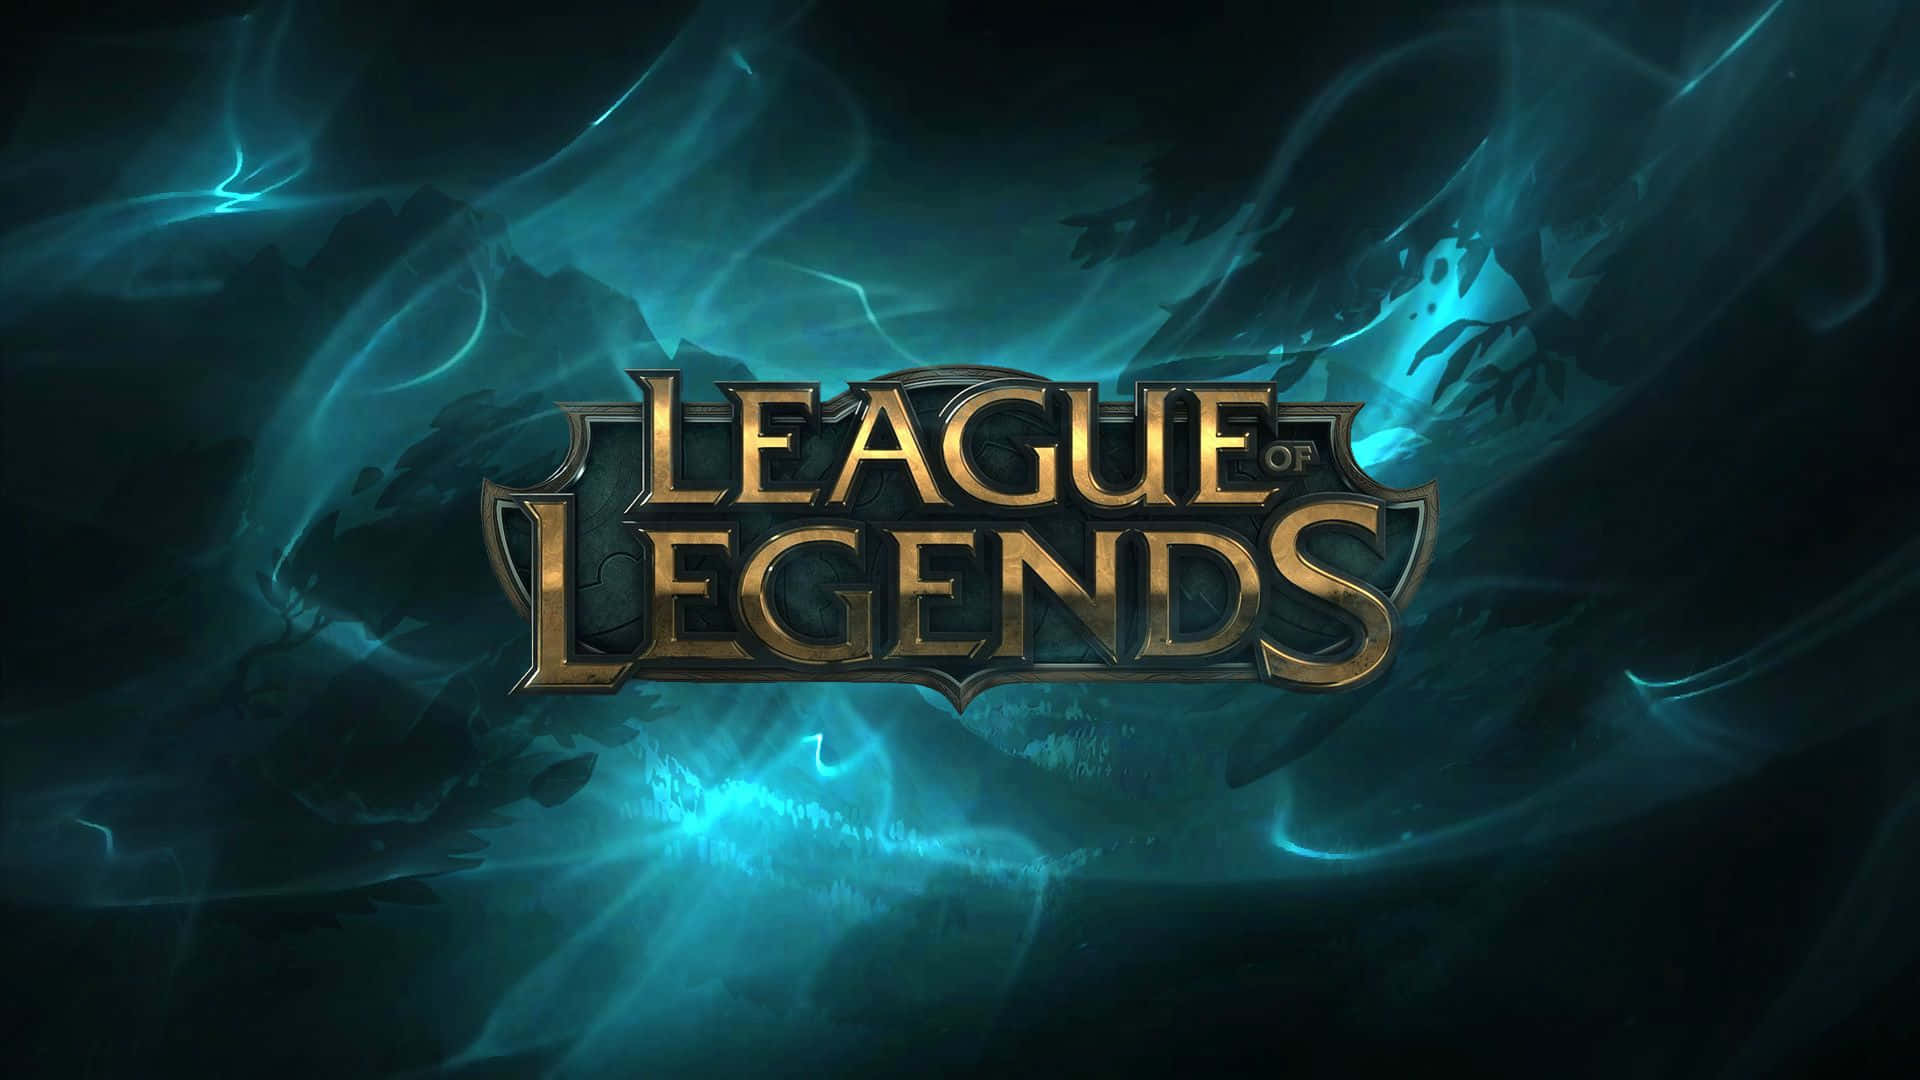 The Best League of Legends players in action